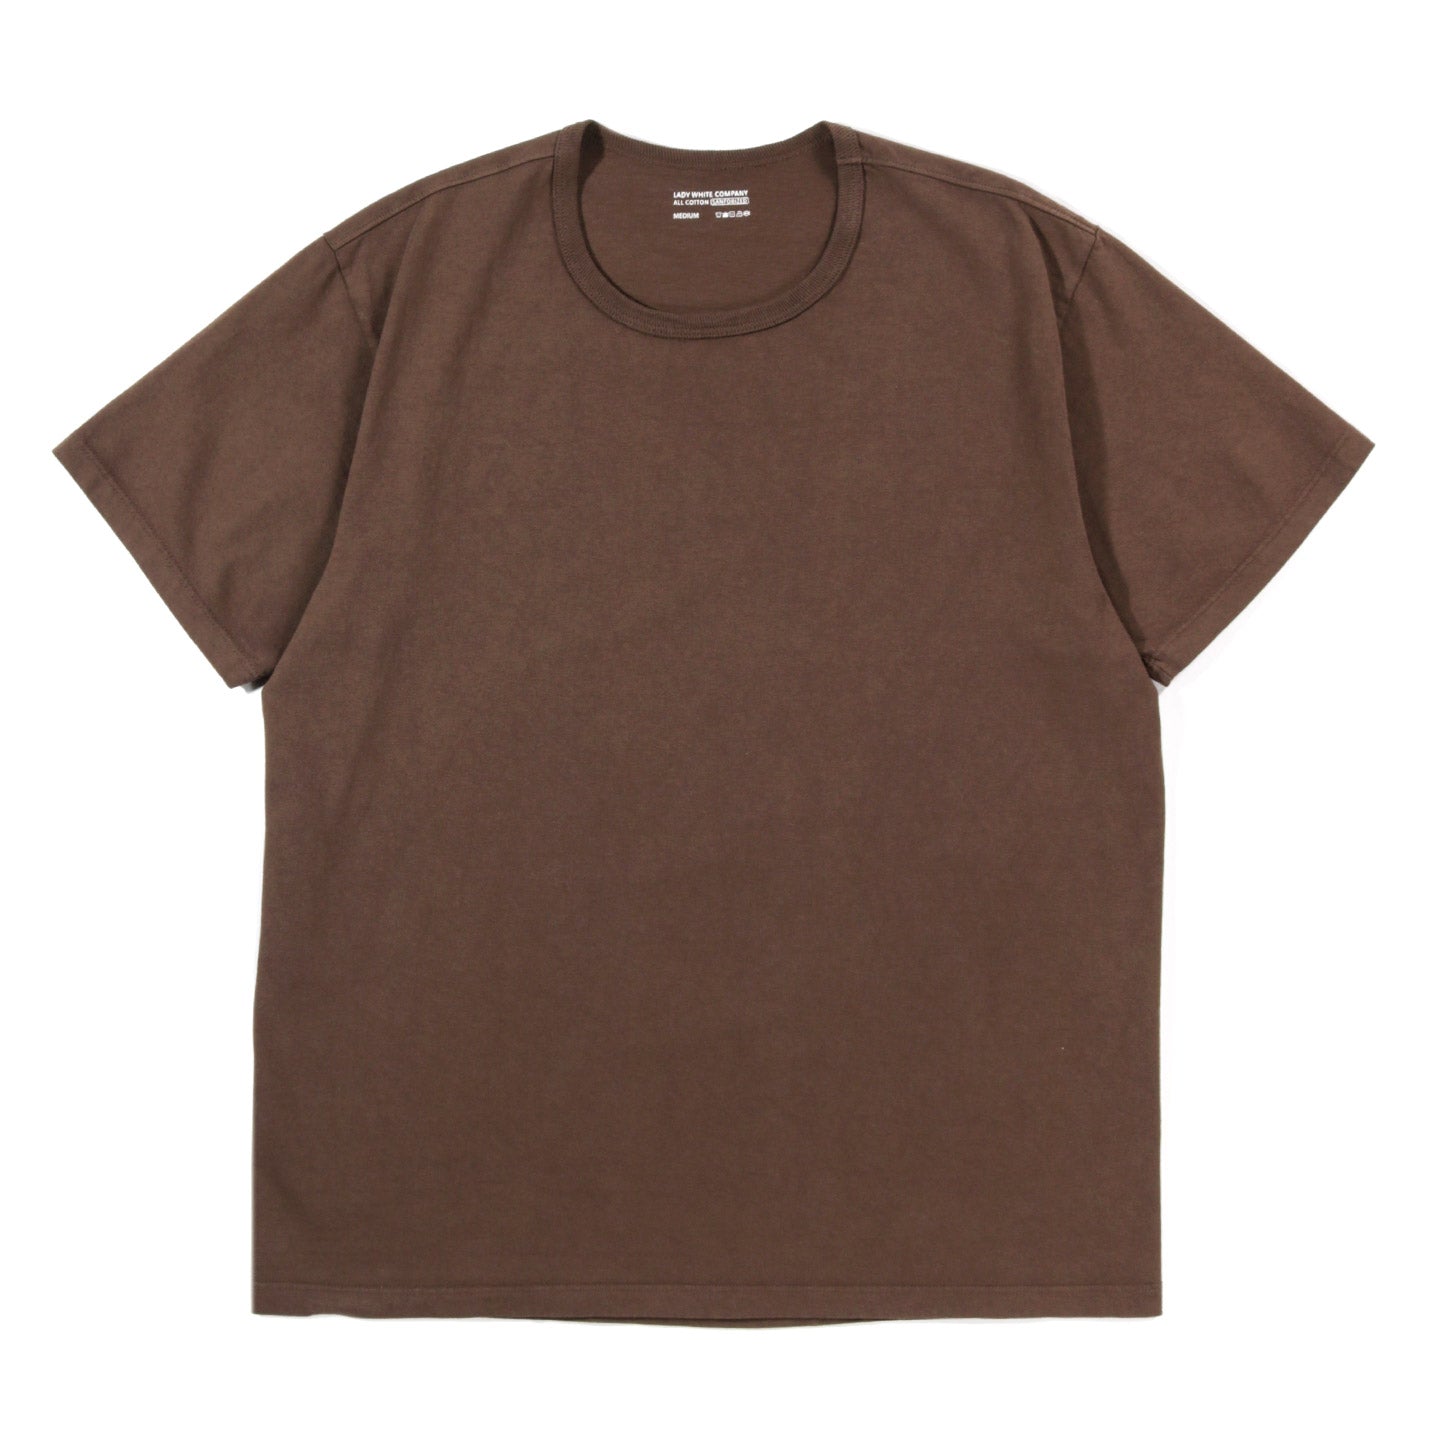 LADY WHITE CO. T-SHIRT 2-PACK DARK TAUPE